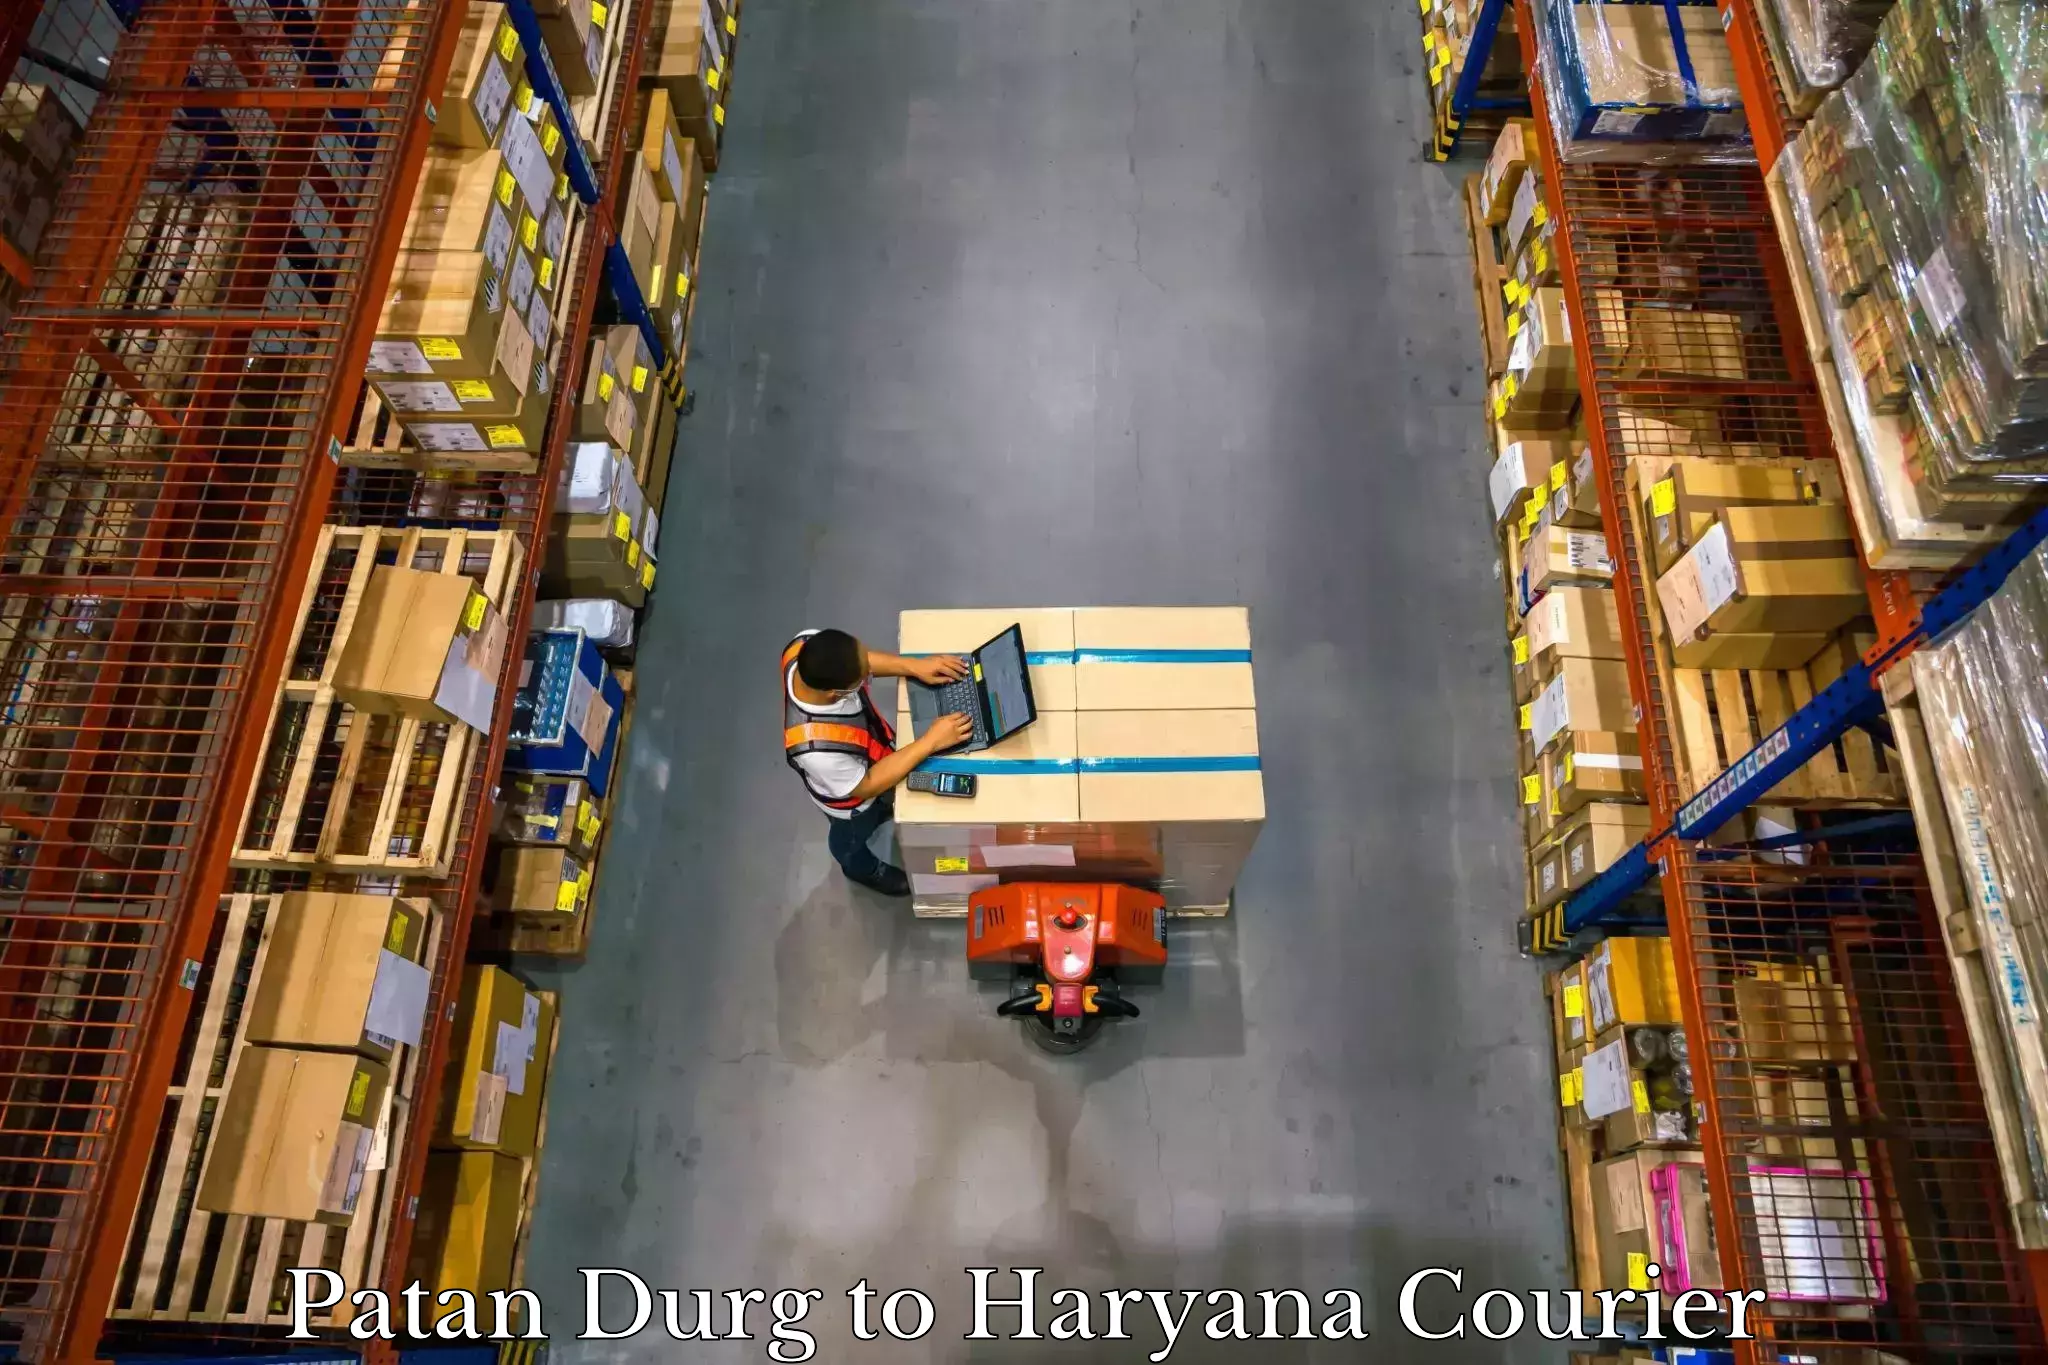 Luggage shipment specialists Patan Durg to Haryana